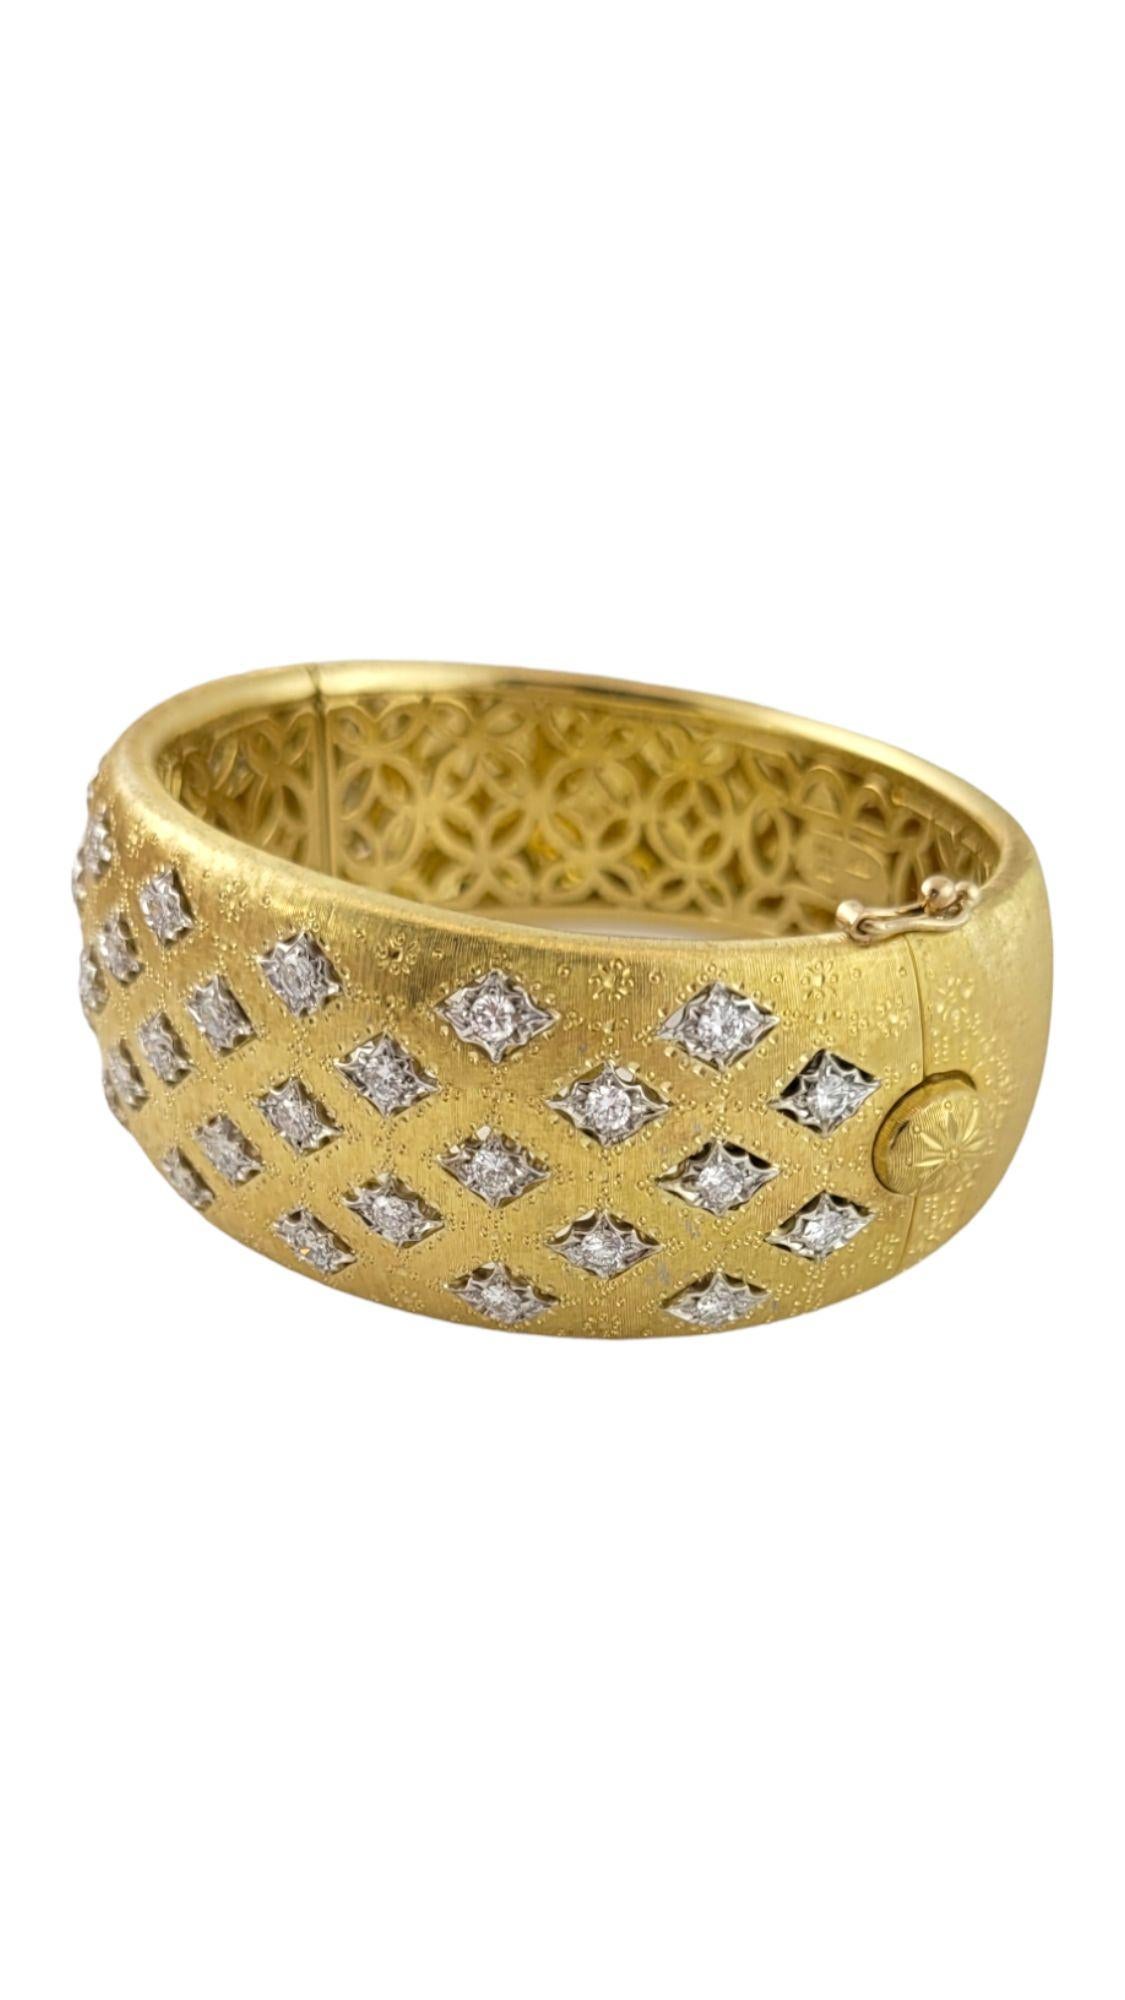 H. Gold 18K yellow Gold Diamond Bangle with Florentine Finish

This gorgeous 18K gold bangle by NYC's H. Gold has 37 sparkling round brilliant cut diamonds with a Florentine finish! This bangle is a classic styles statement piece that shows off